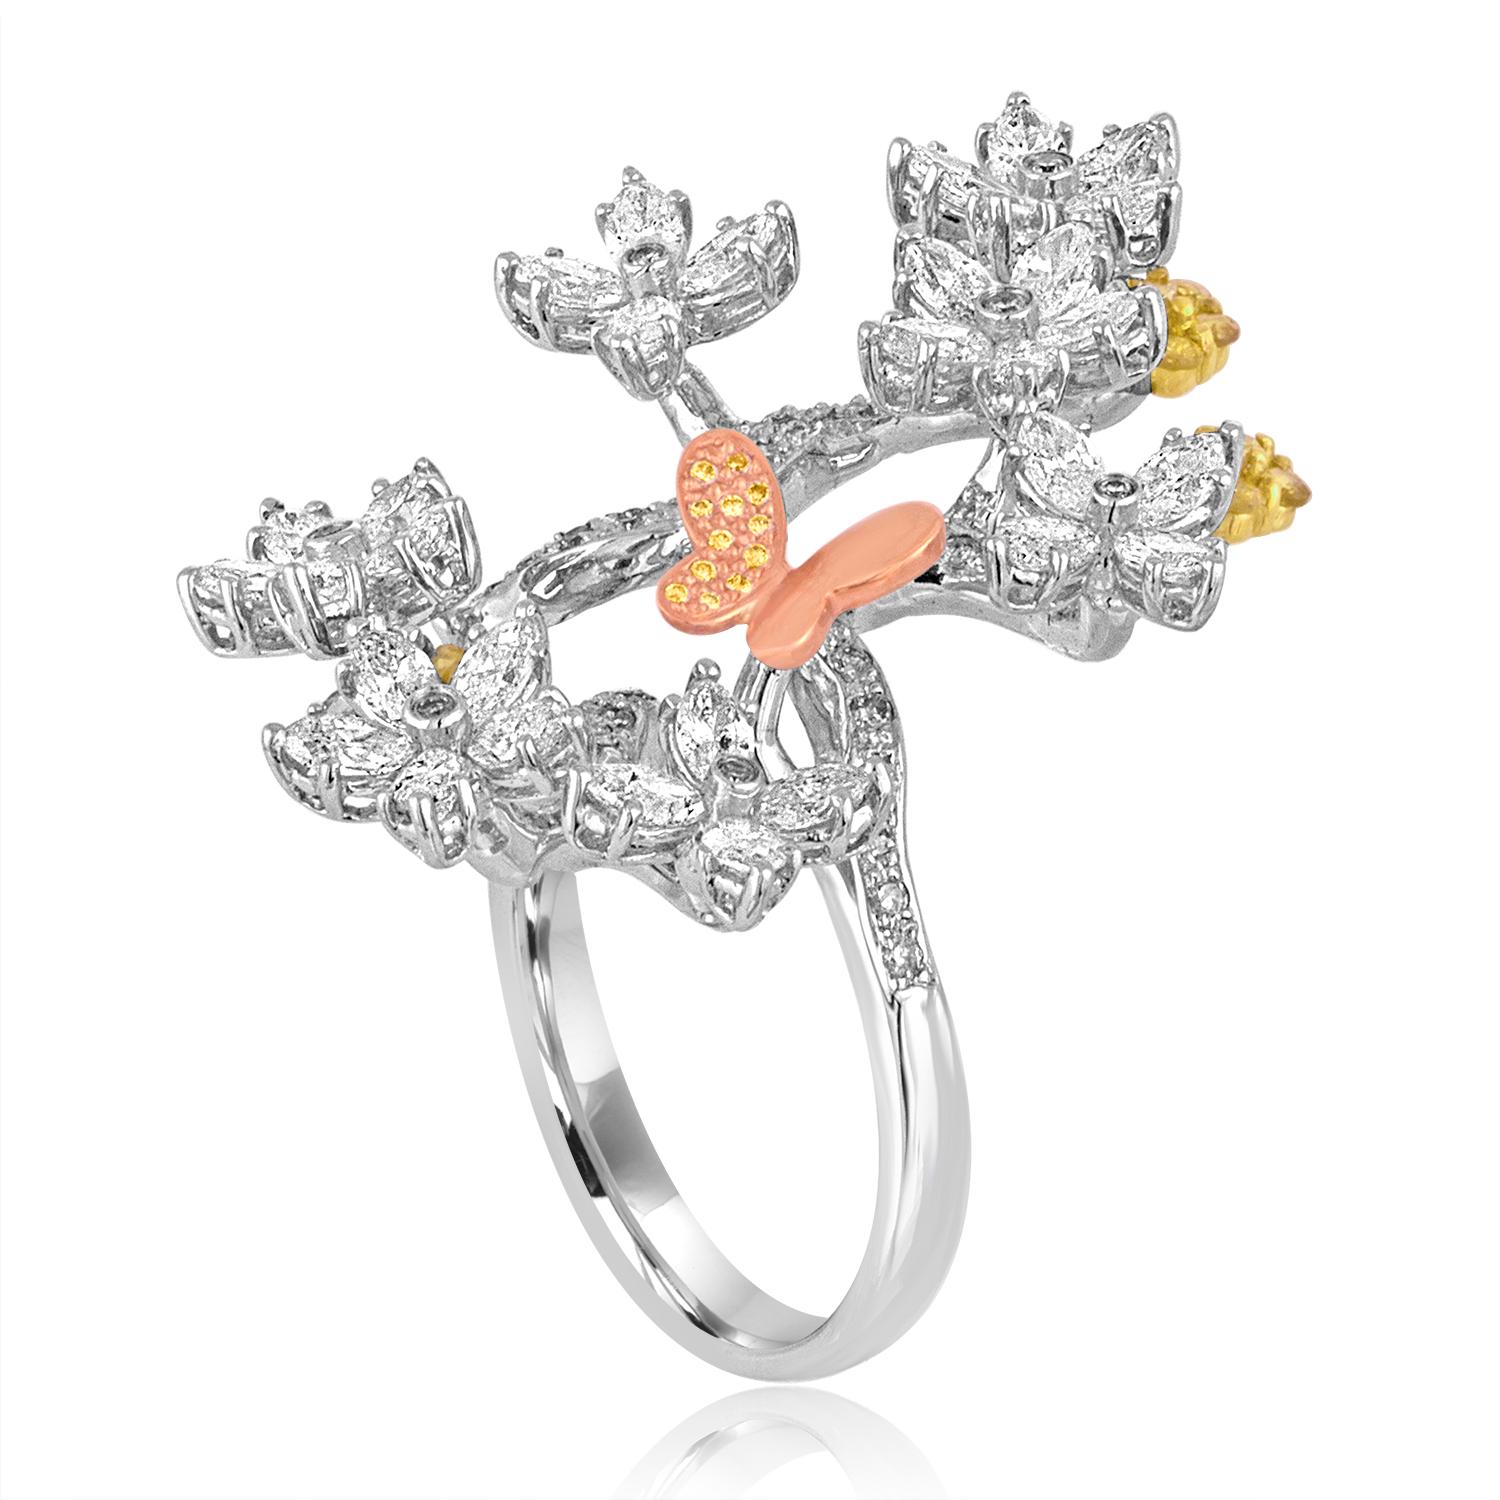 Very Unusual Flower Branch Ring
The ring is 18K White, Yellow, Rose Gold
There are 2.50 Carats in Diamonds G/H SI
The ring is a size 6.75, sizable
The ring measures 1.5